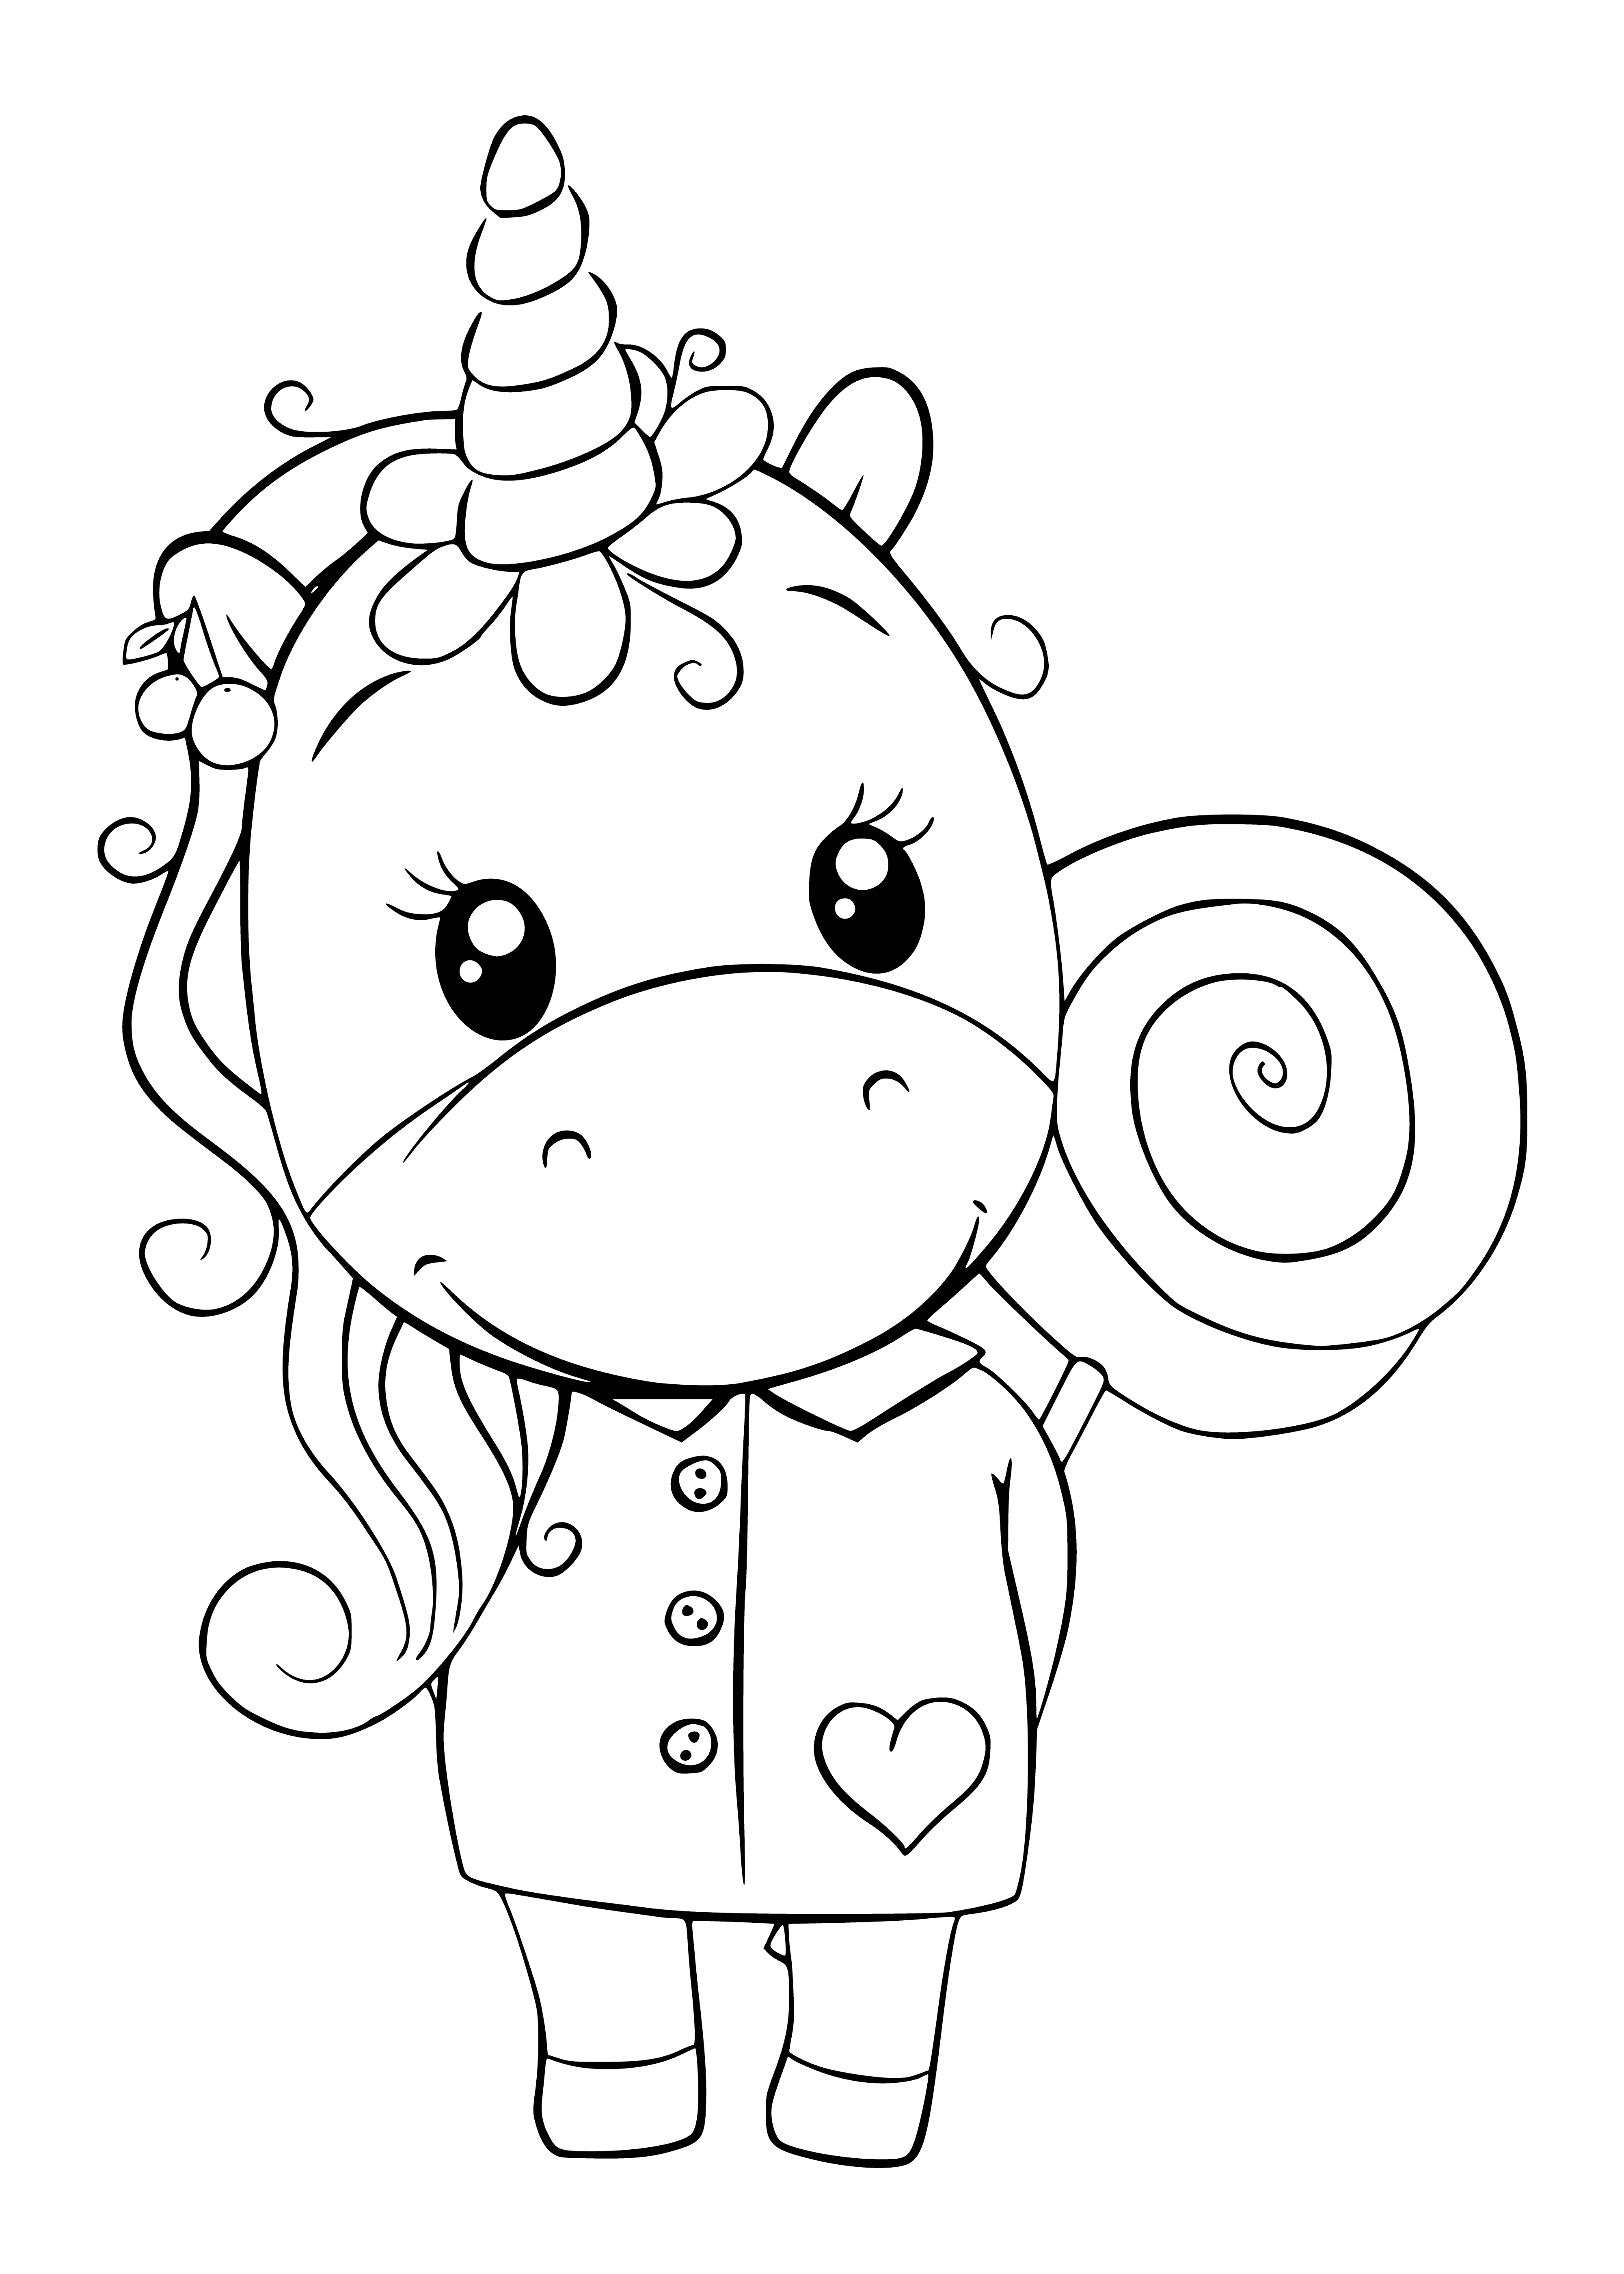 coloring page: A cute white unicorn, pink mane/tail, gold horn & blue eyes stands on a green hill with flowers. #coloringpage #unicorn